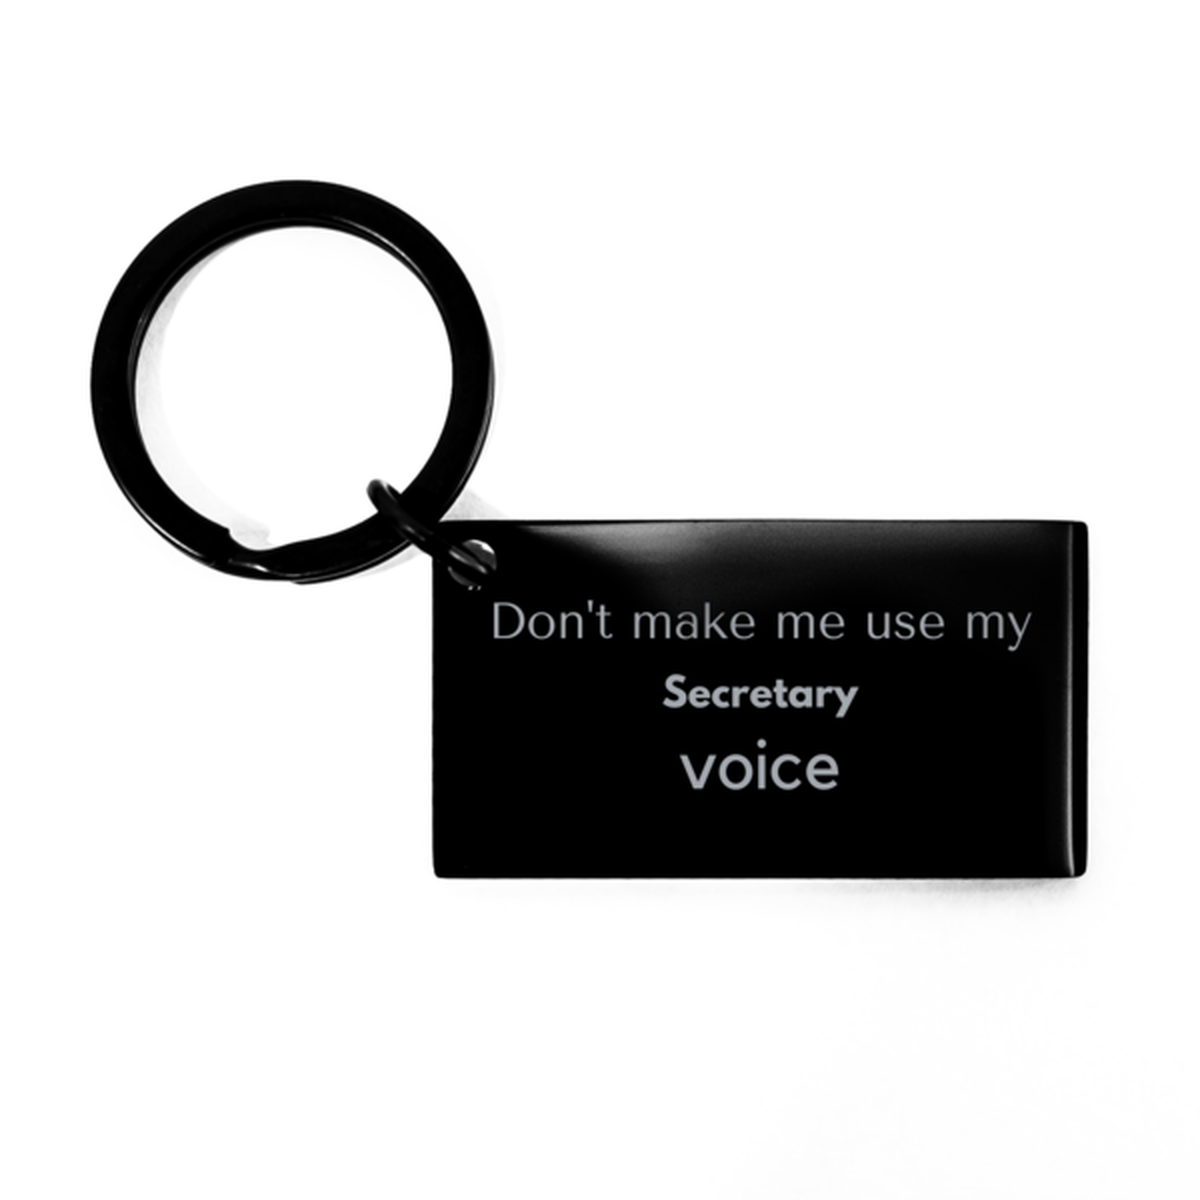 Don't make me use my Secretary voice, Sarcasm Secretary Gifts, Christmas Secretary Keychain Birthday Unique Gifts For Secretary Coworkers, Men, Women, Colleague, Friends